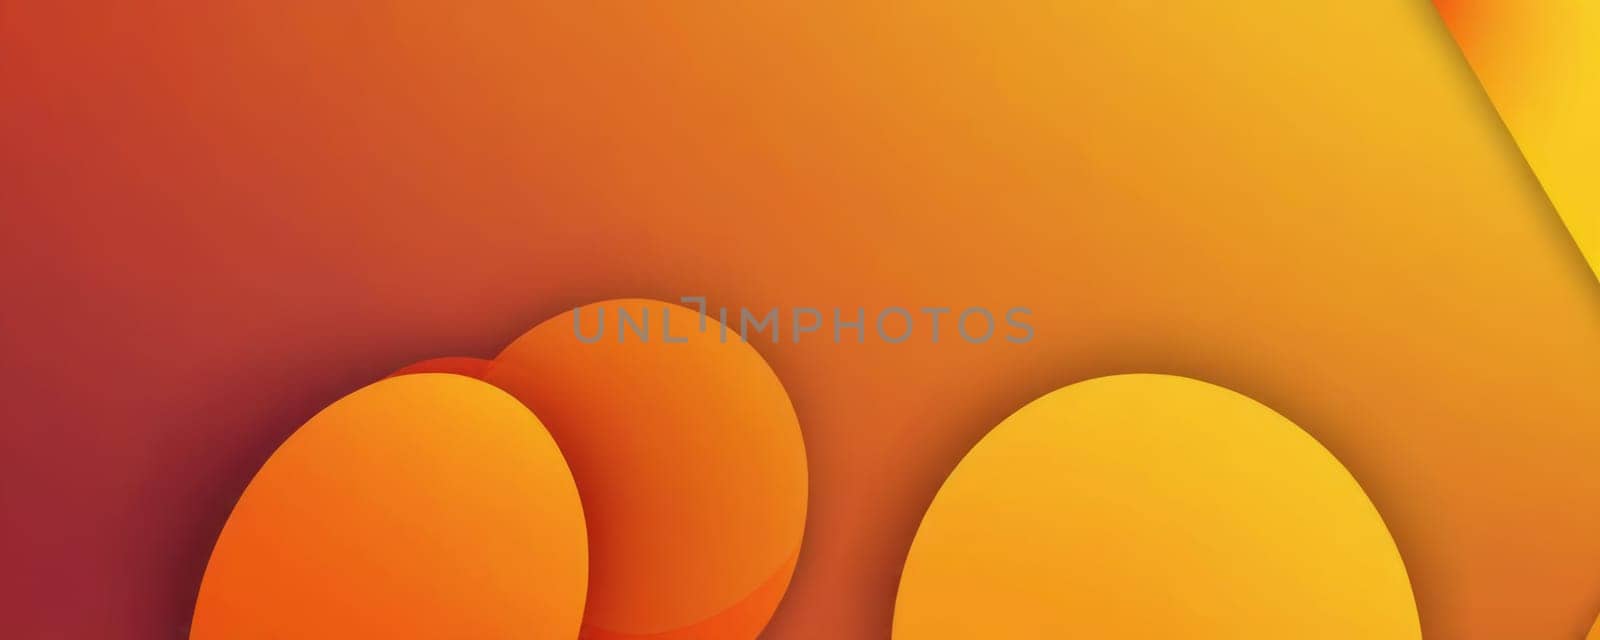 Cylindrical Shapes in Yellow and Dark orange by nkotlyar